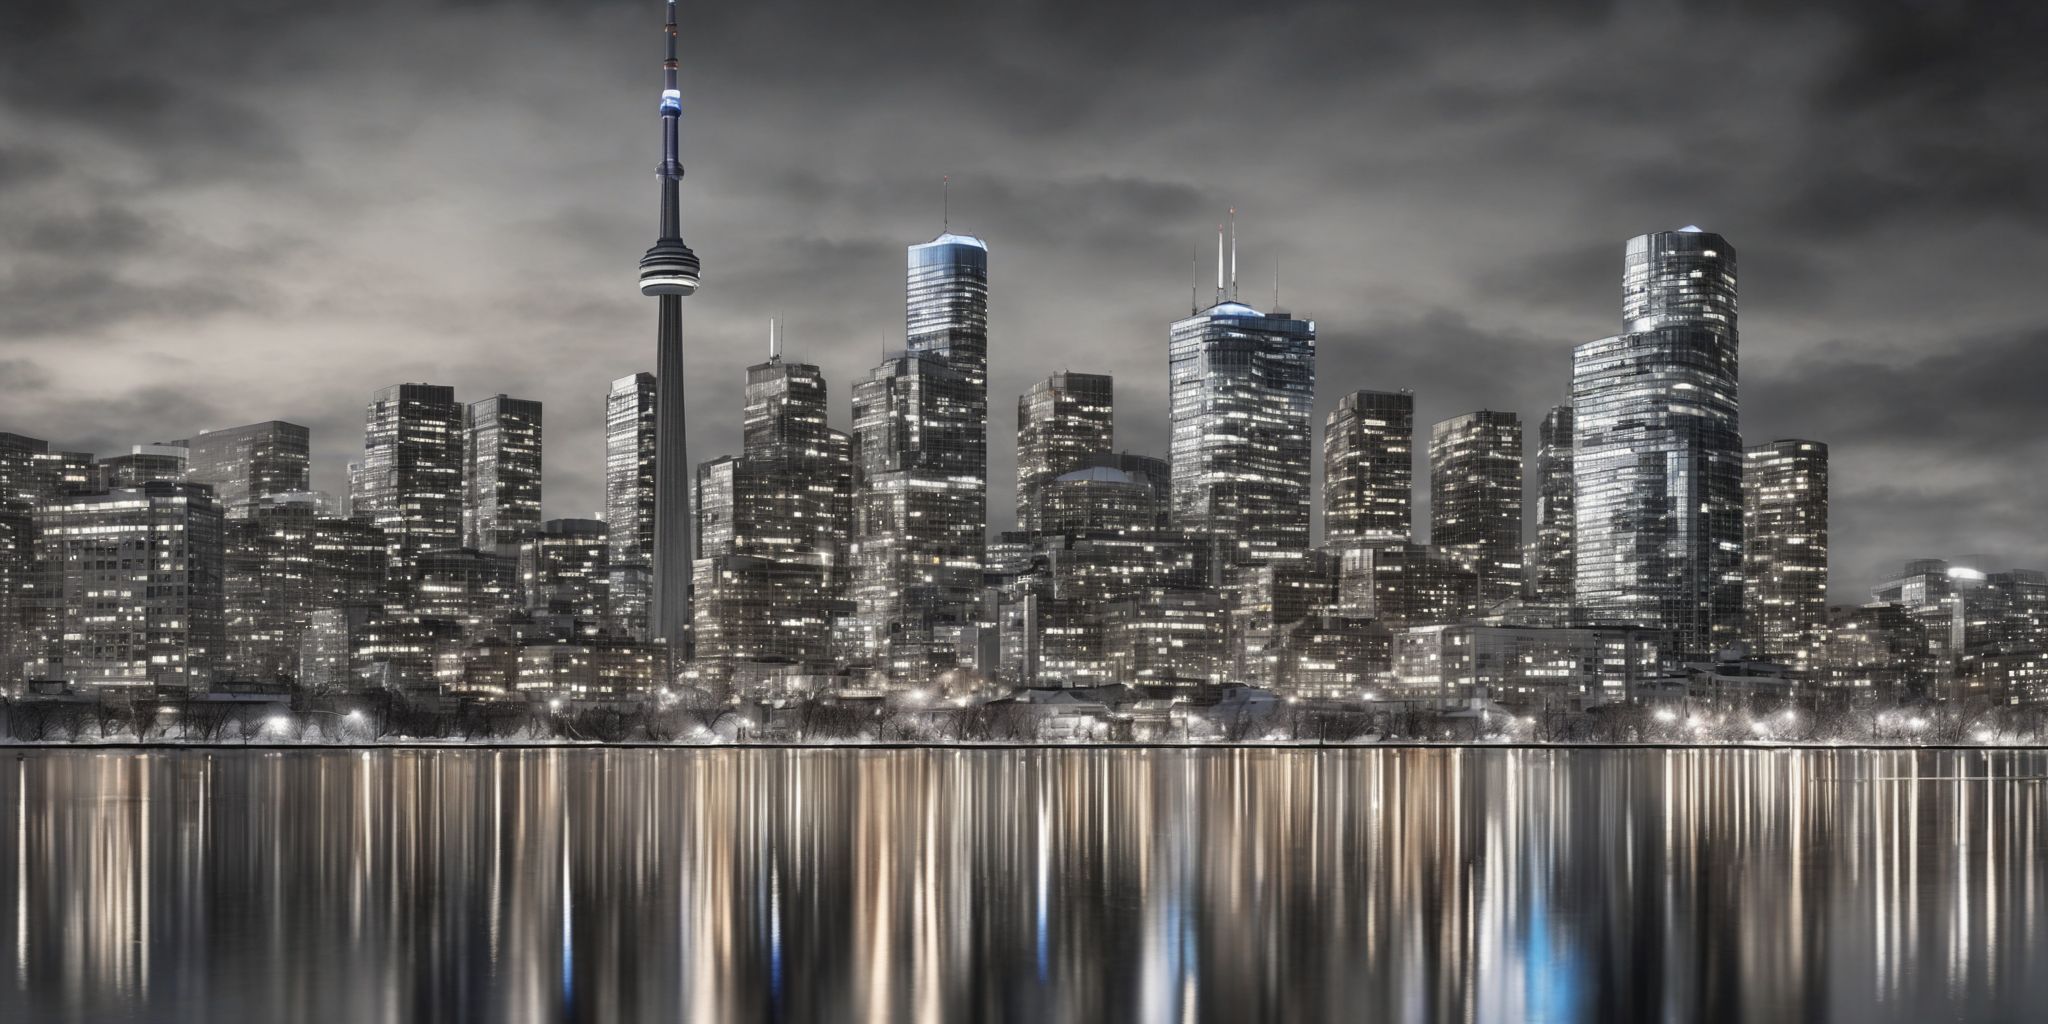 Credit Unions Toronto: Skylines  in realistic, photographic style